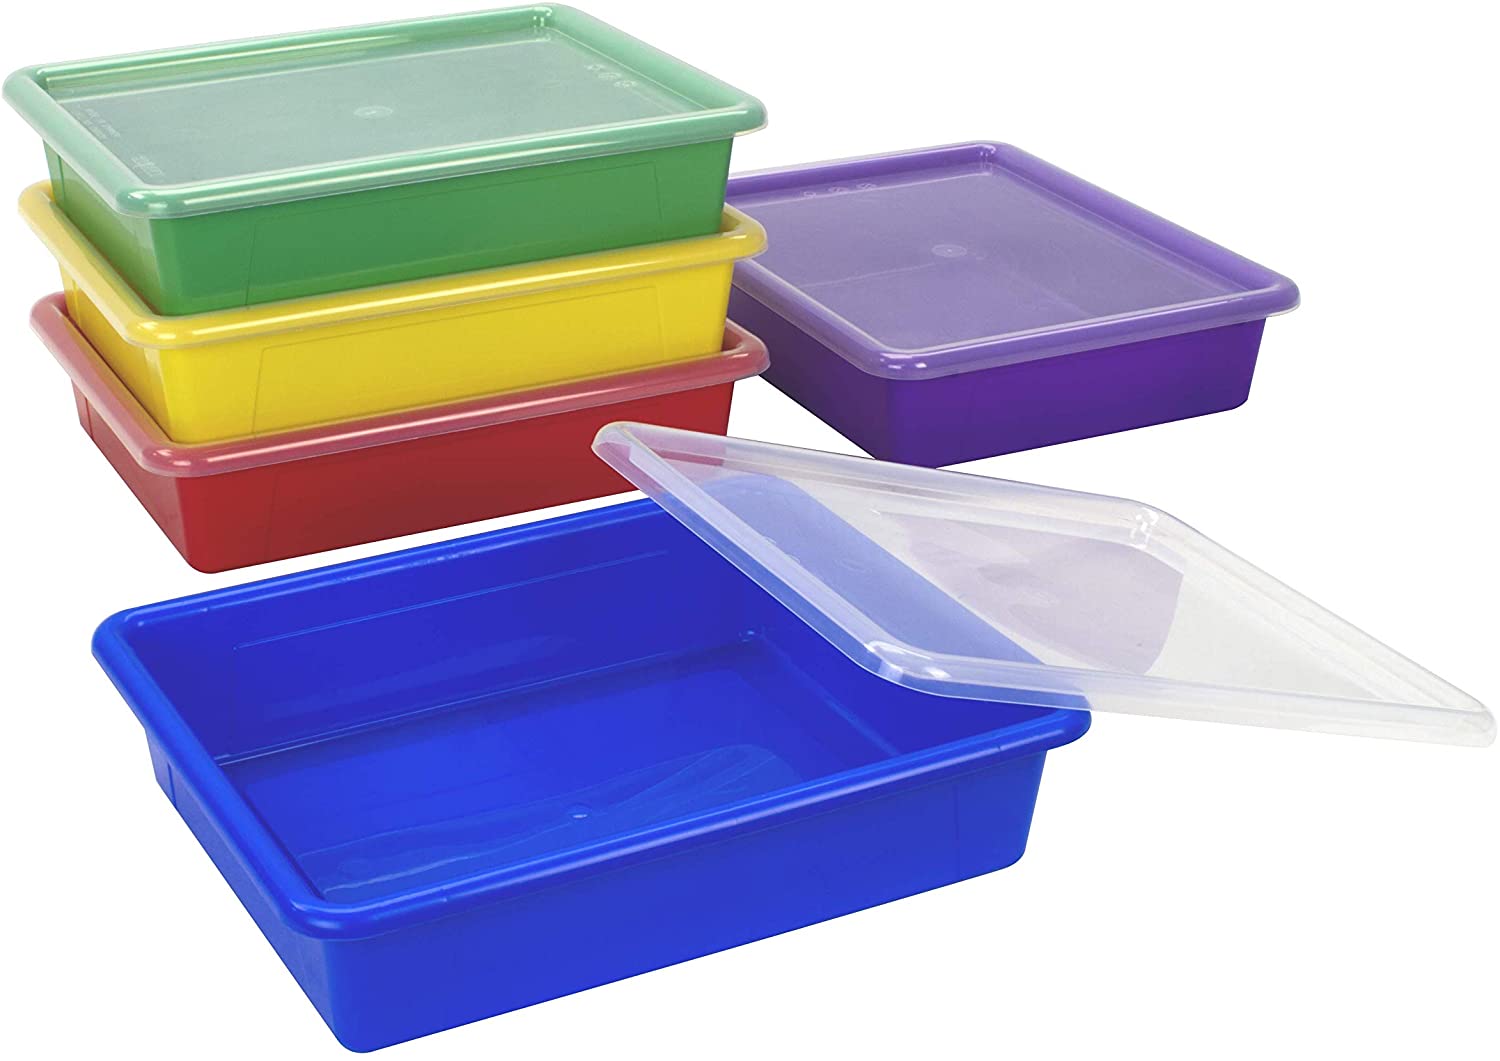 These sturdy plastic 3-inch deep storage trays are designed for anywhere you need efficient storage.